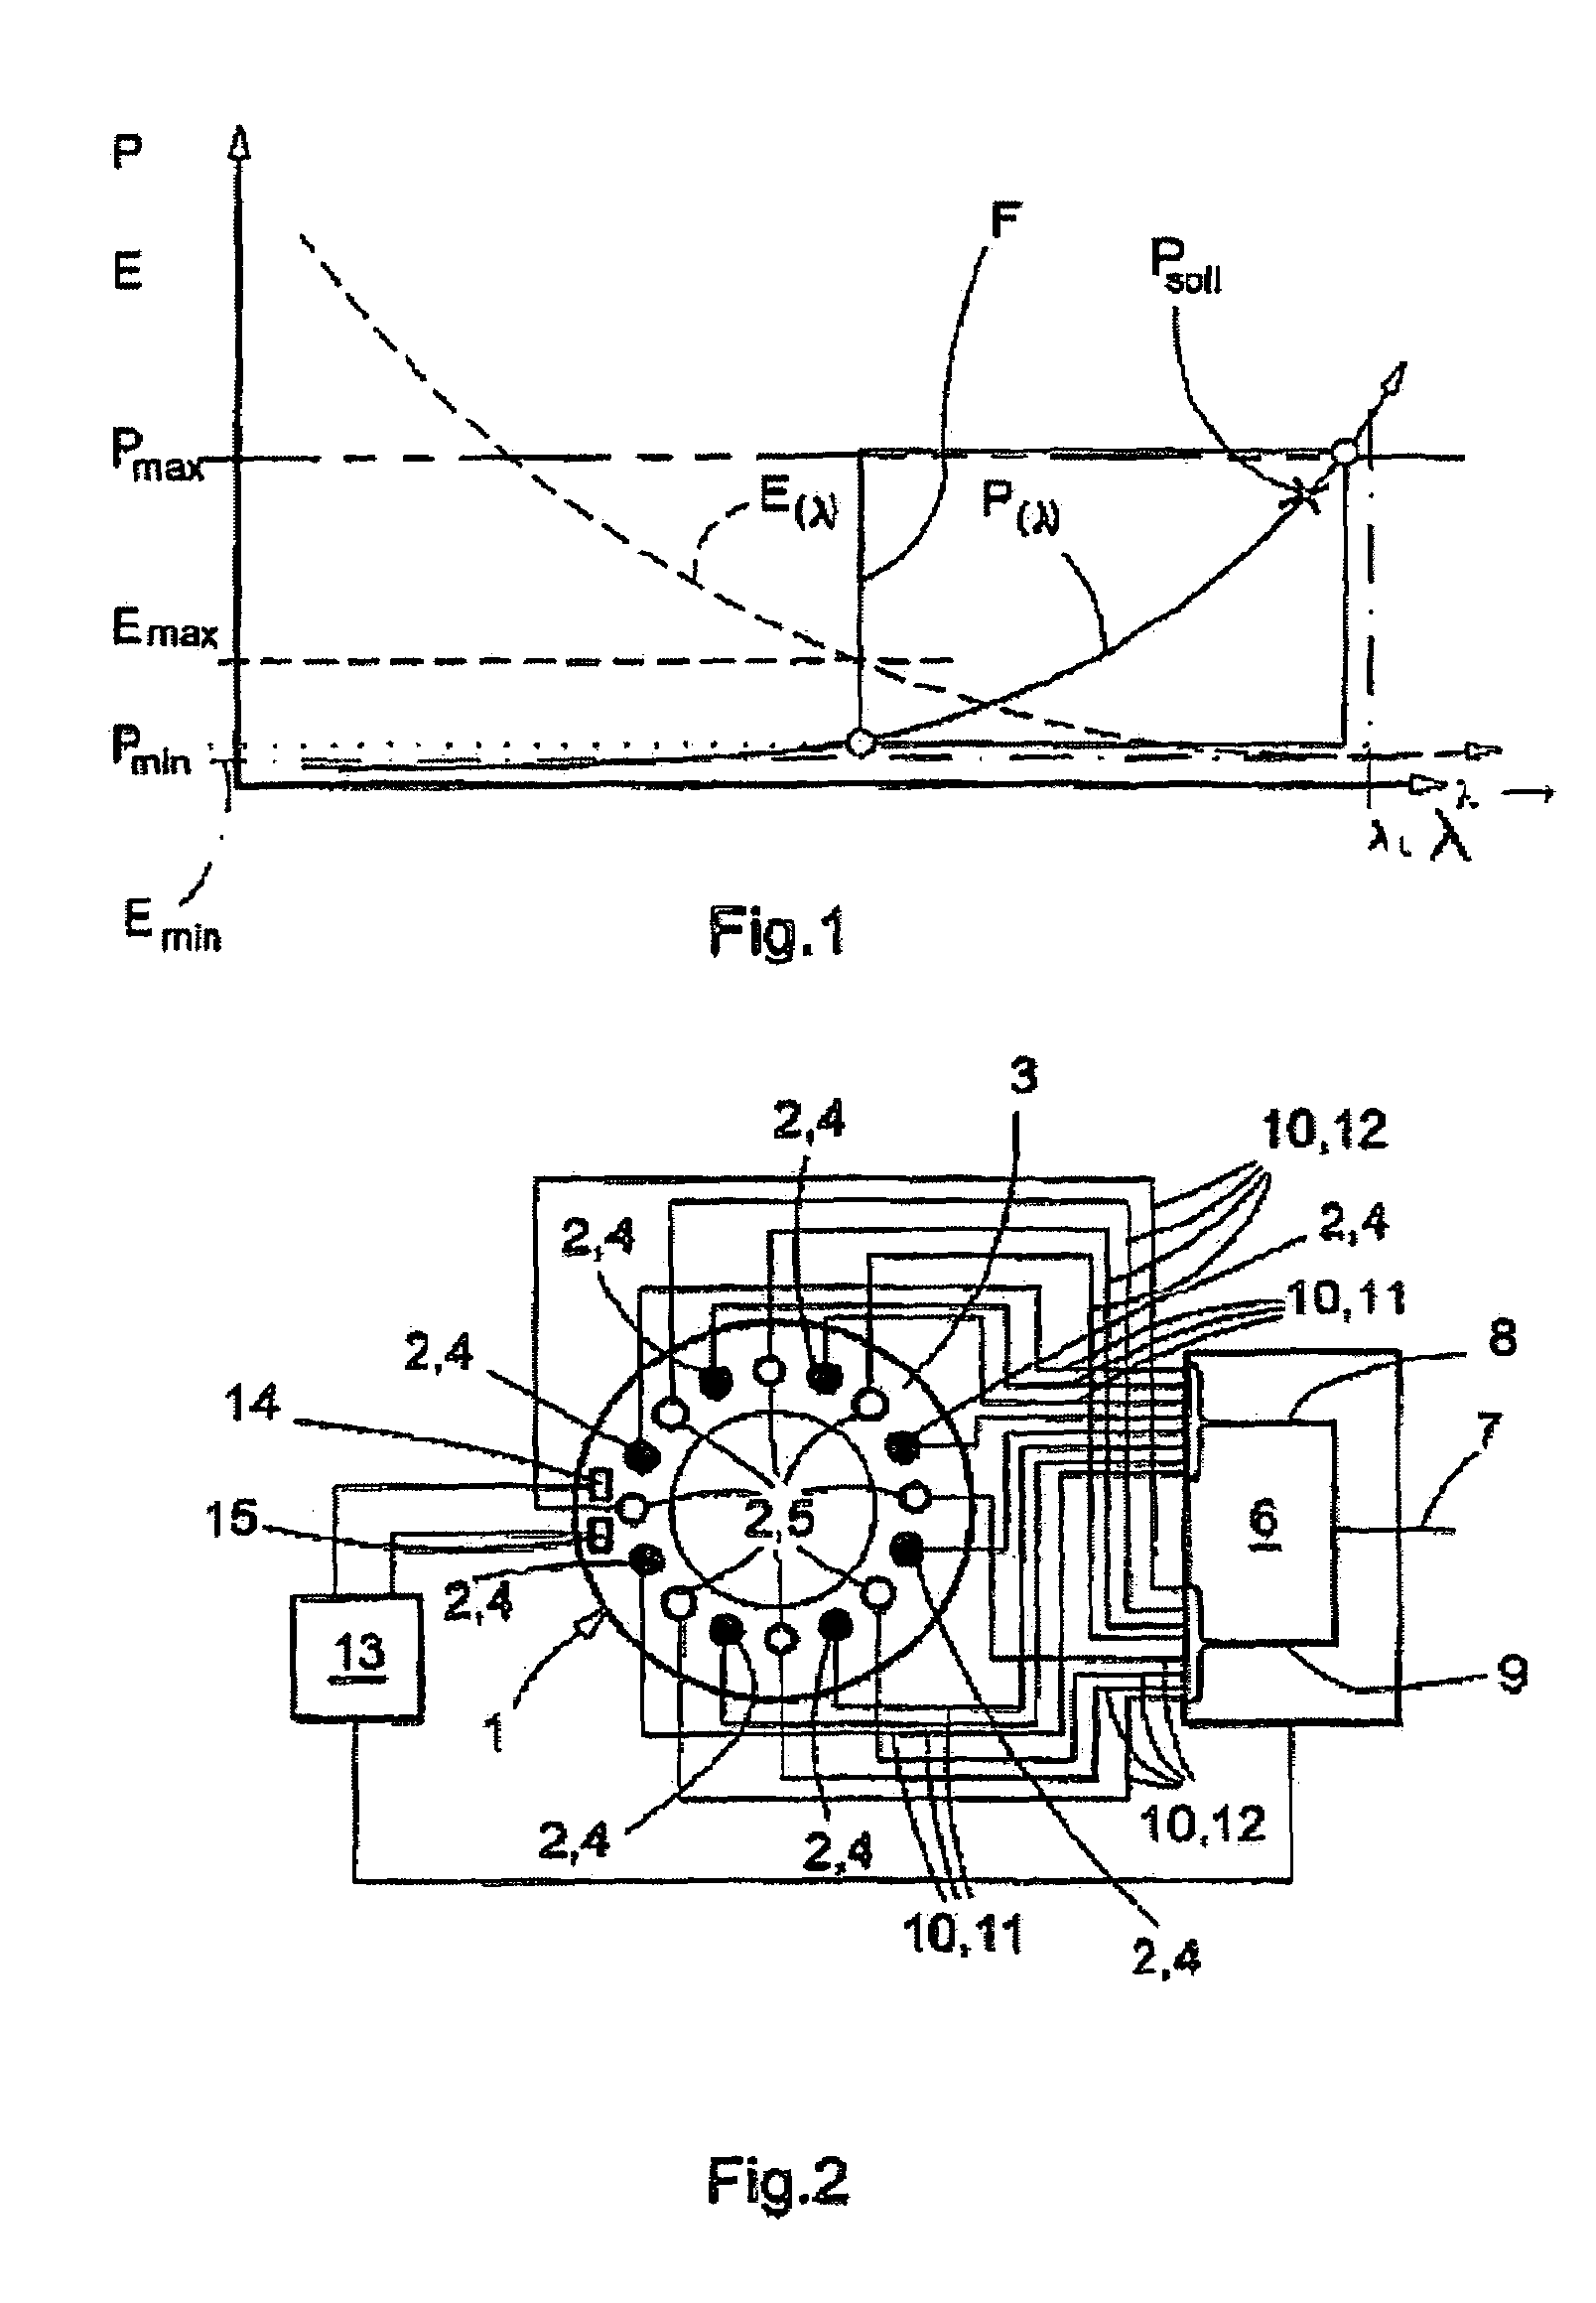 Method for operating a furnace